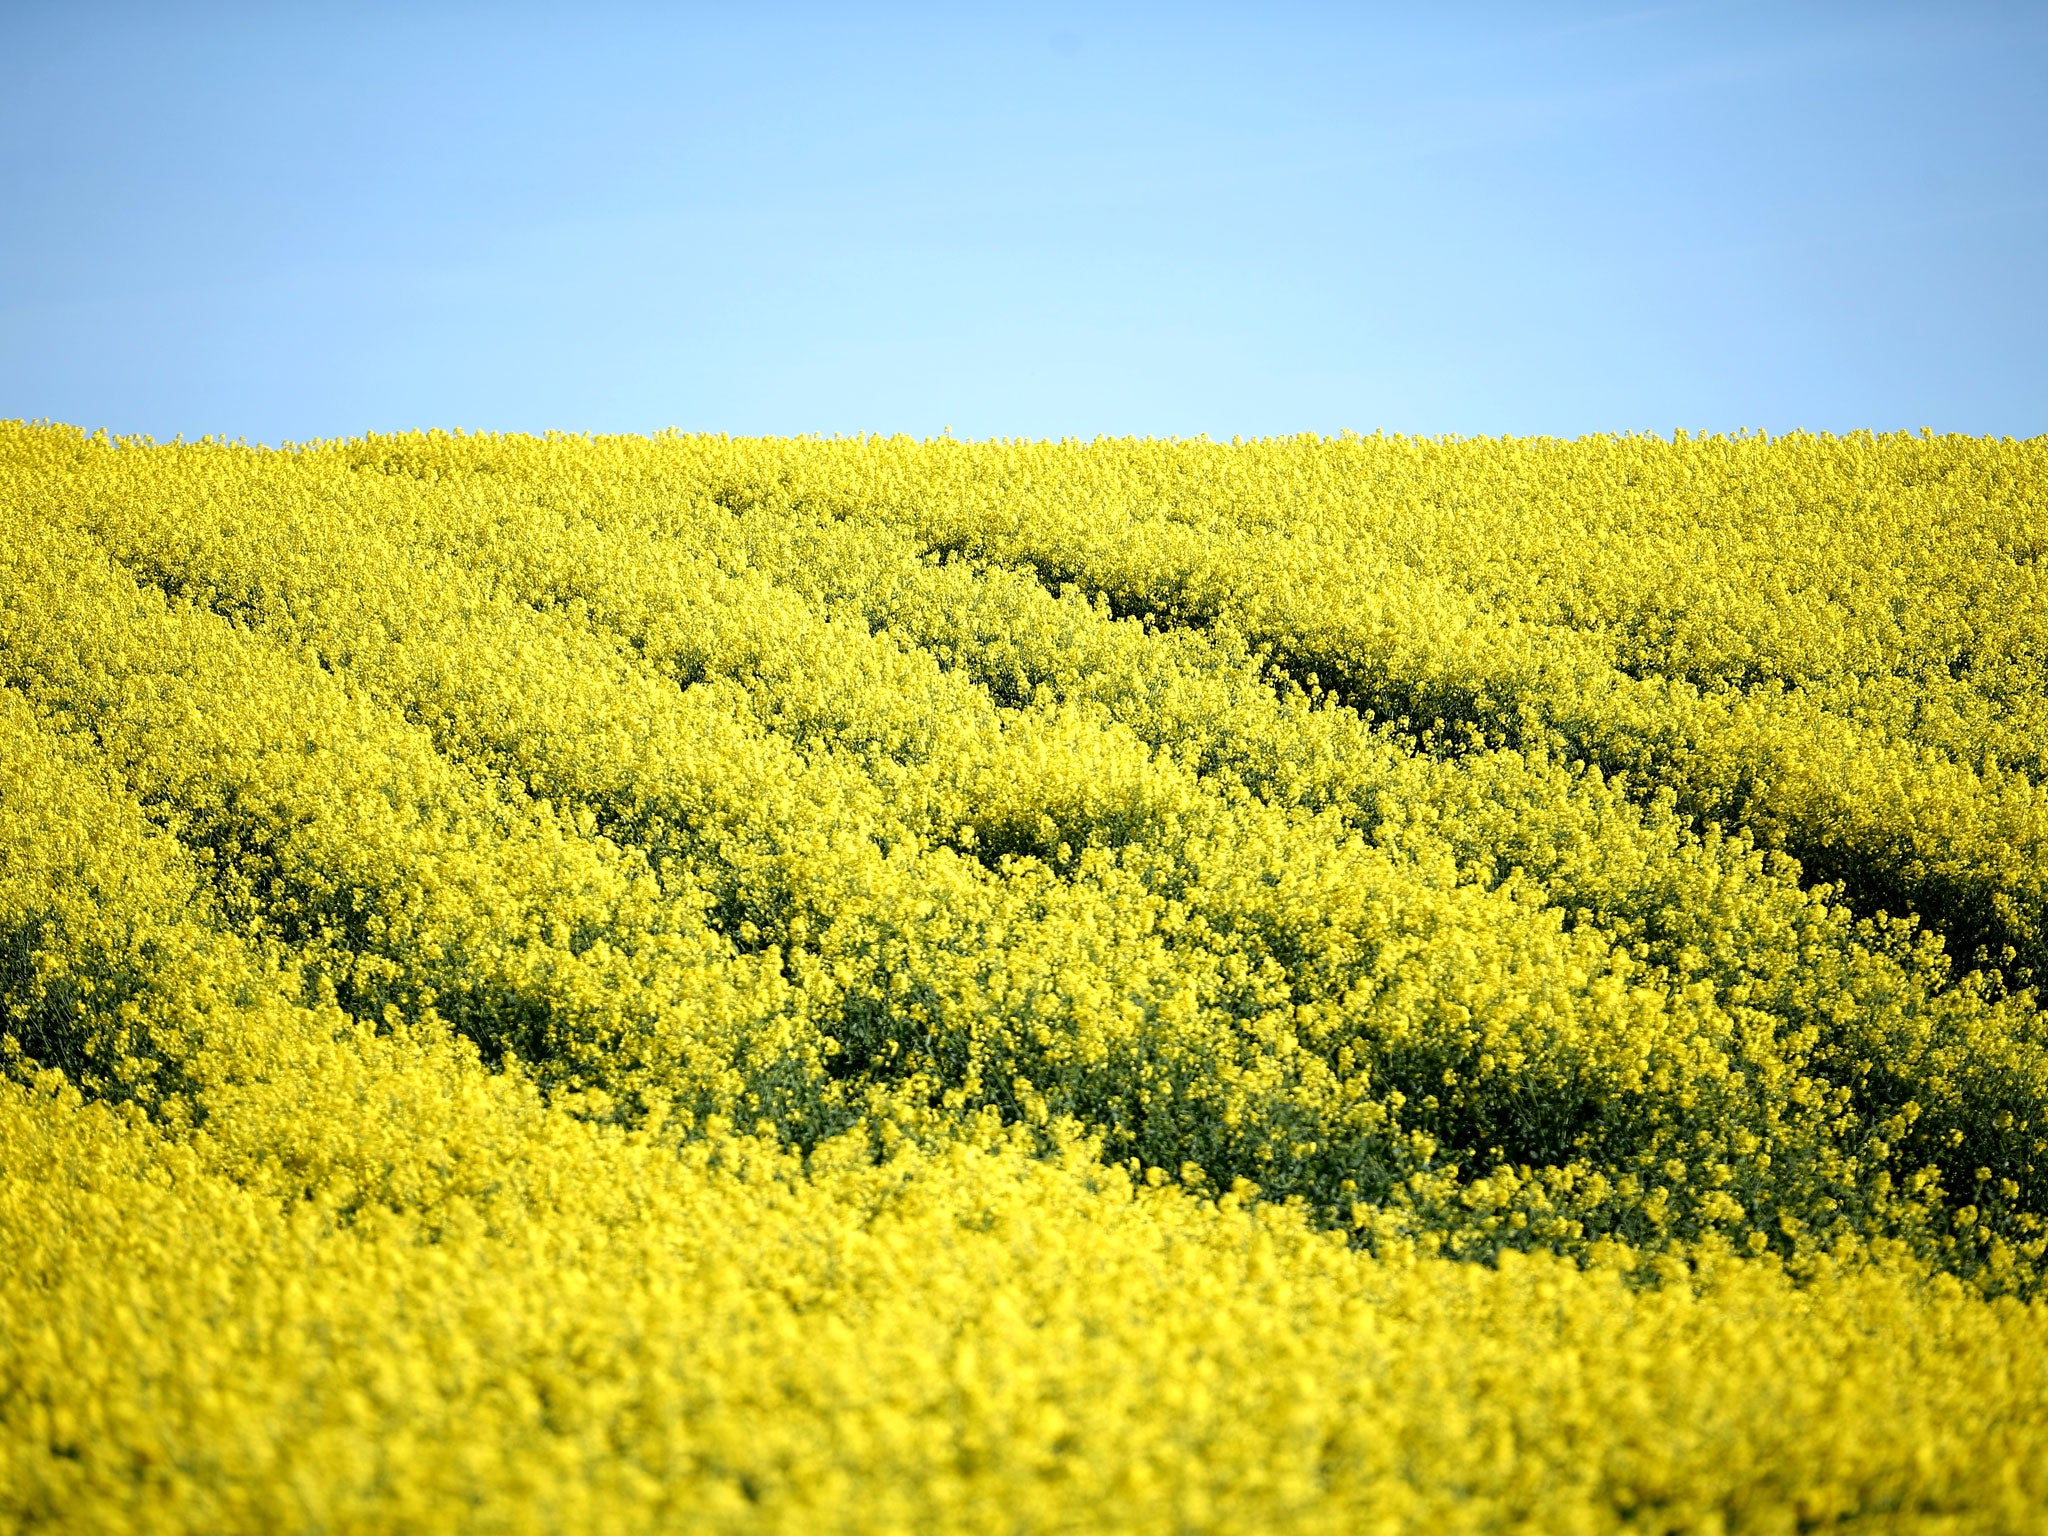 Rapeseed blooms in the sunshine in a field close to the village of Whitegate in Cheshire in Whitegate